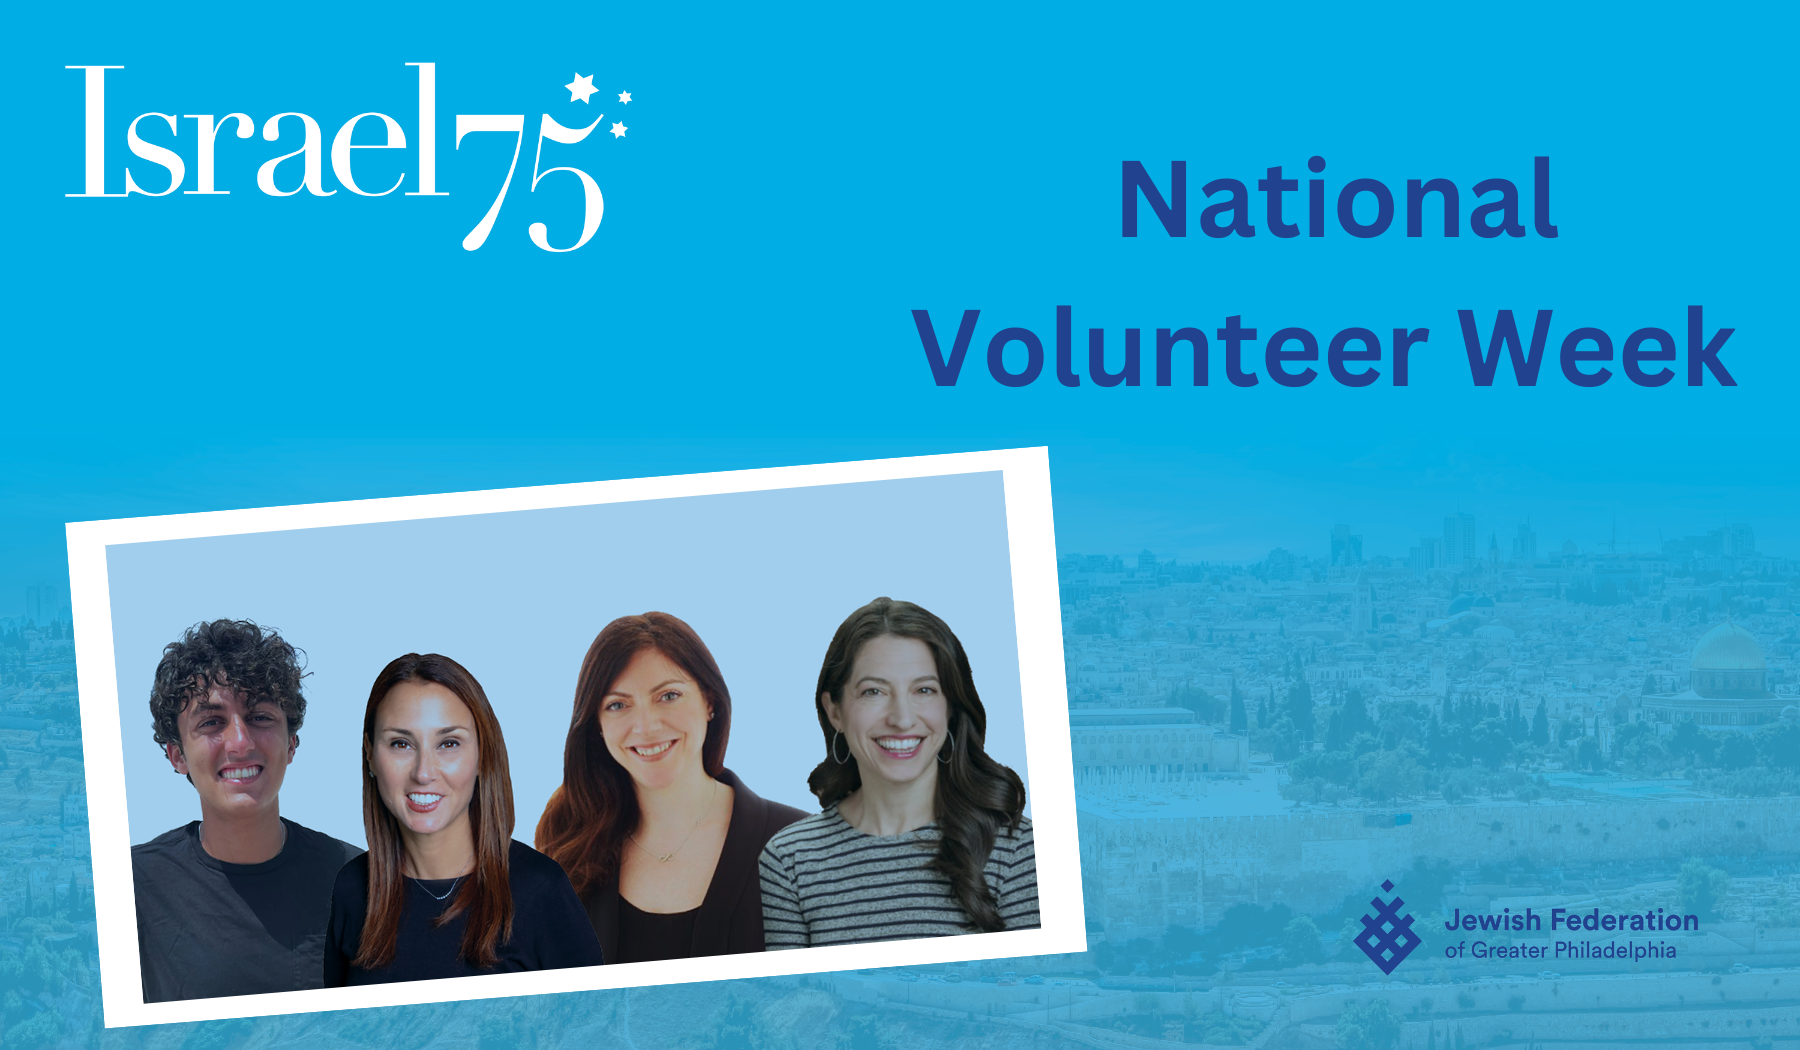 Celebrating National Volunteer Week with the Israel 75 Community Mitzvah Day Co-Chairs